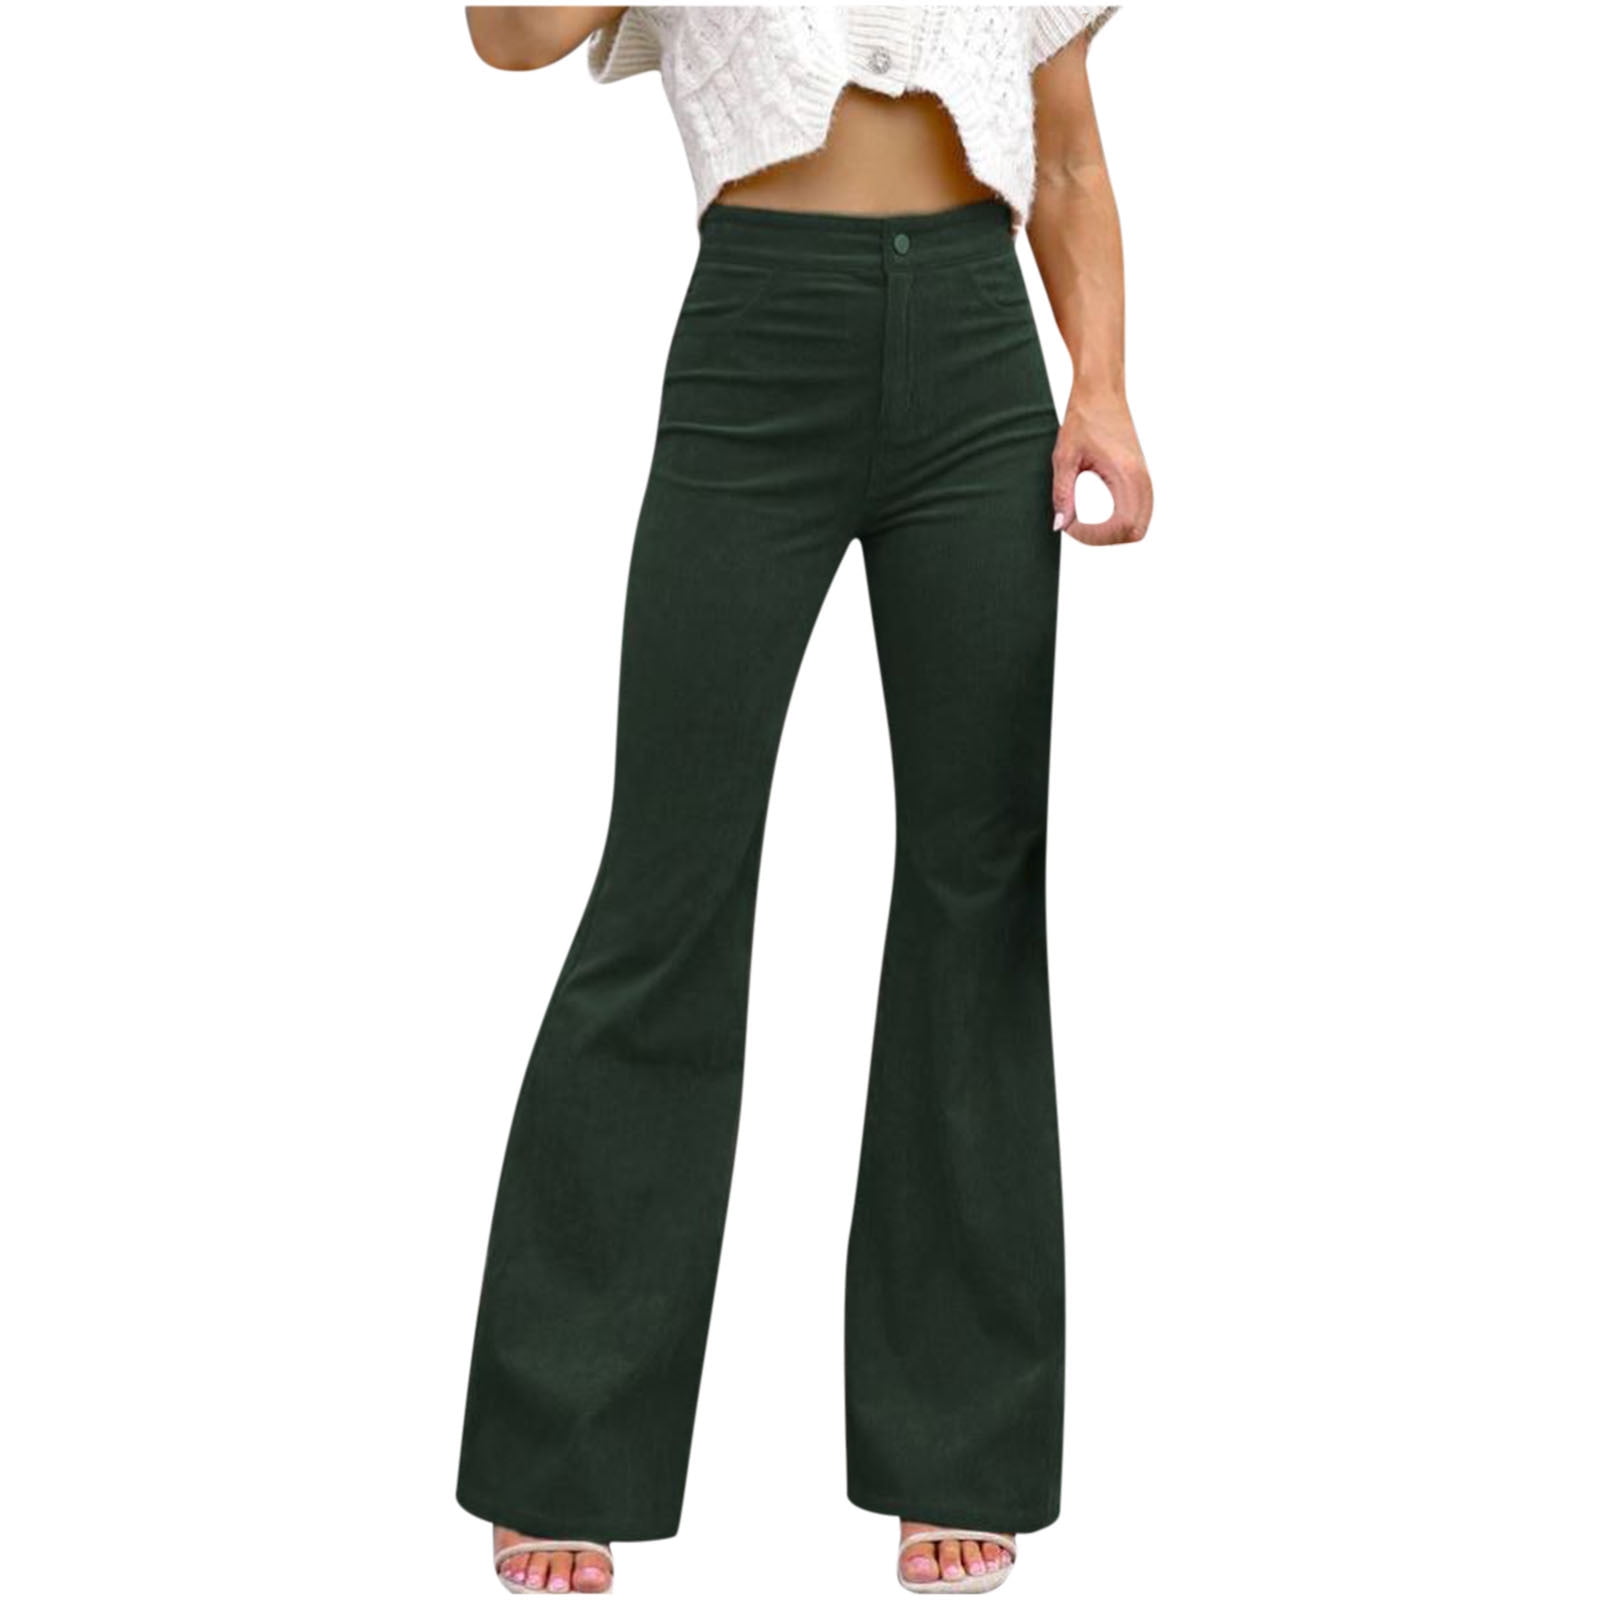 Cicy Bell Women Casual High Waisted Button Pencil Pants Work Office  Straight Leg Dress Pants Fold Pleated Trousers